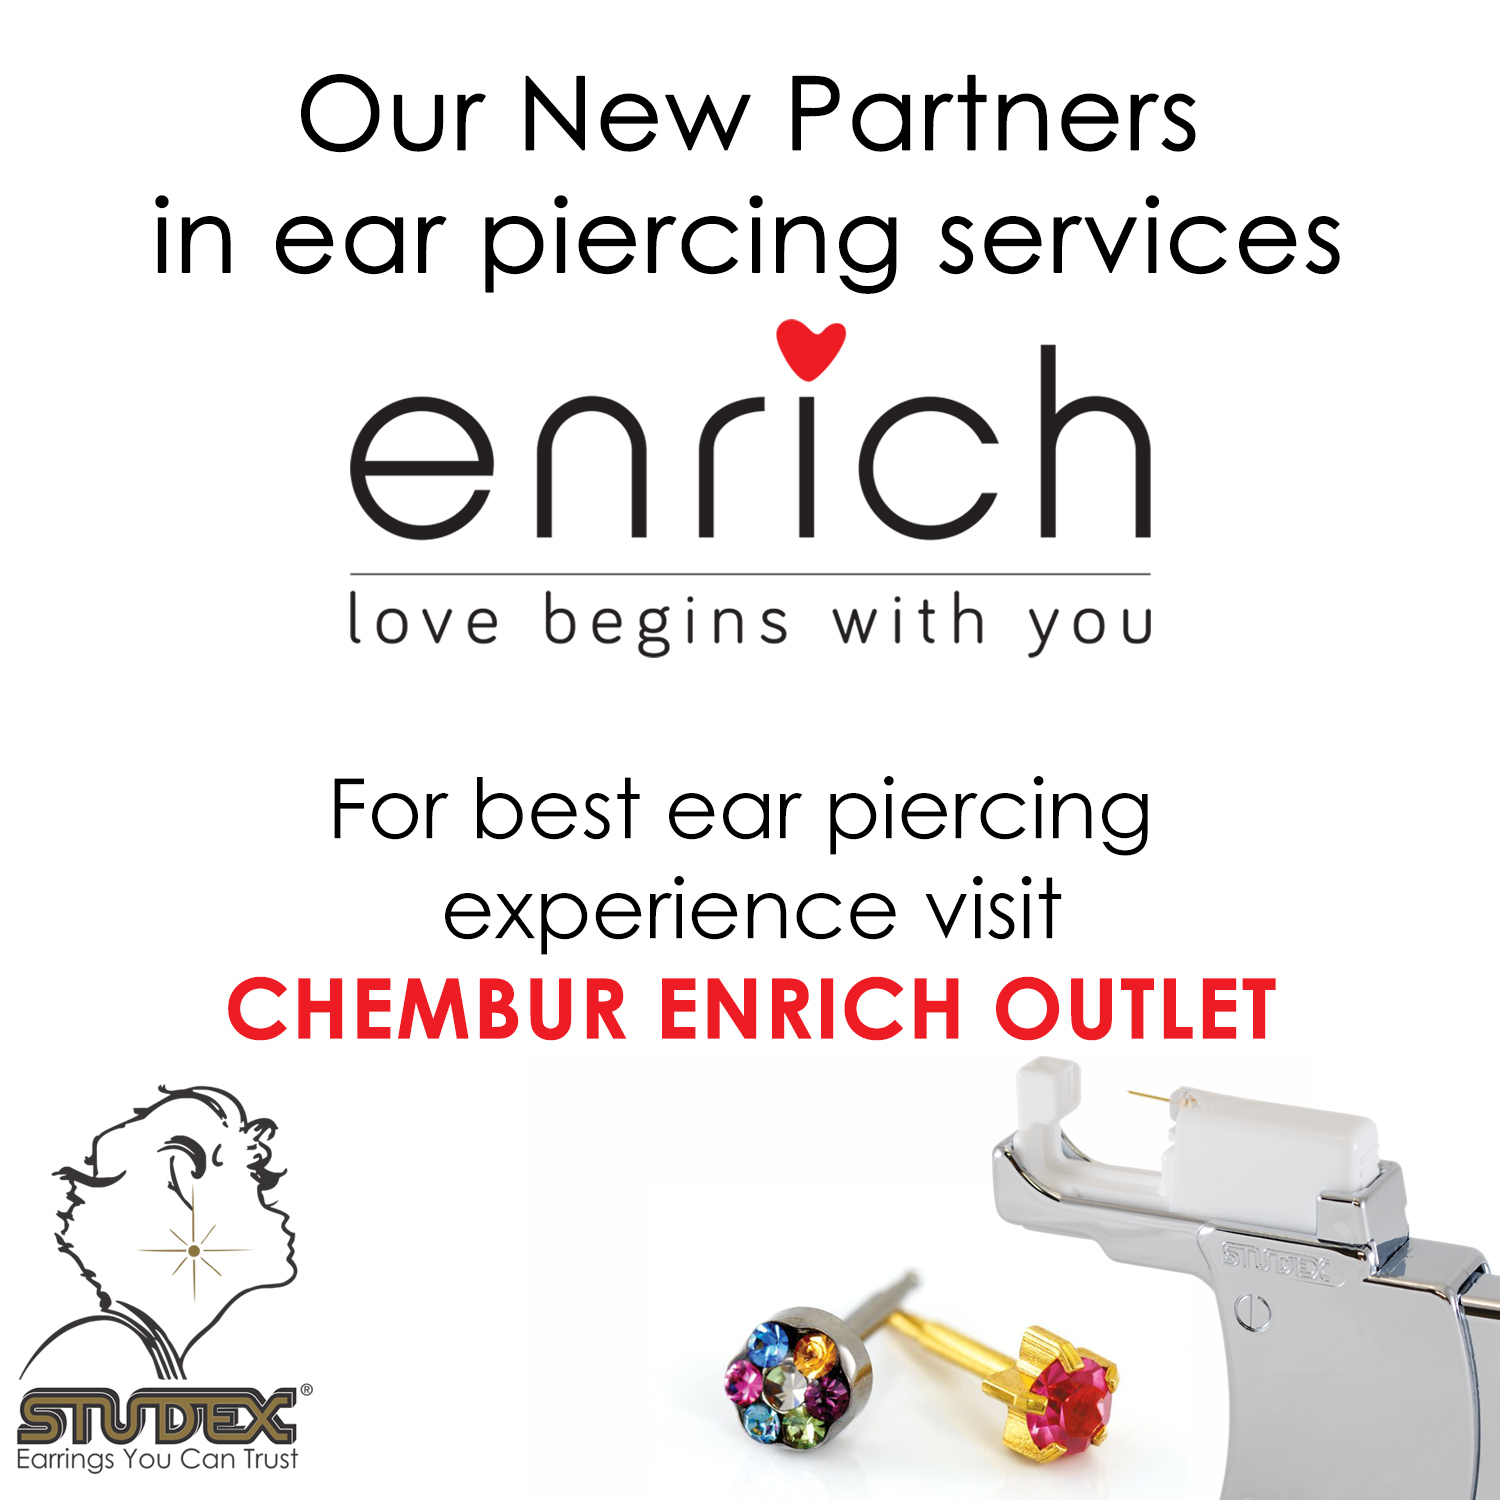 Studex Asia Our New Partner in ear piercing service “enrich”. For best ear-piercing experience visit Chembur enrice outlet (India, Mumbai)